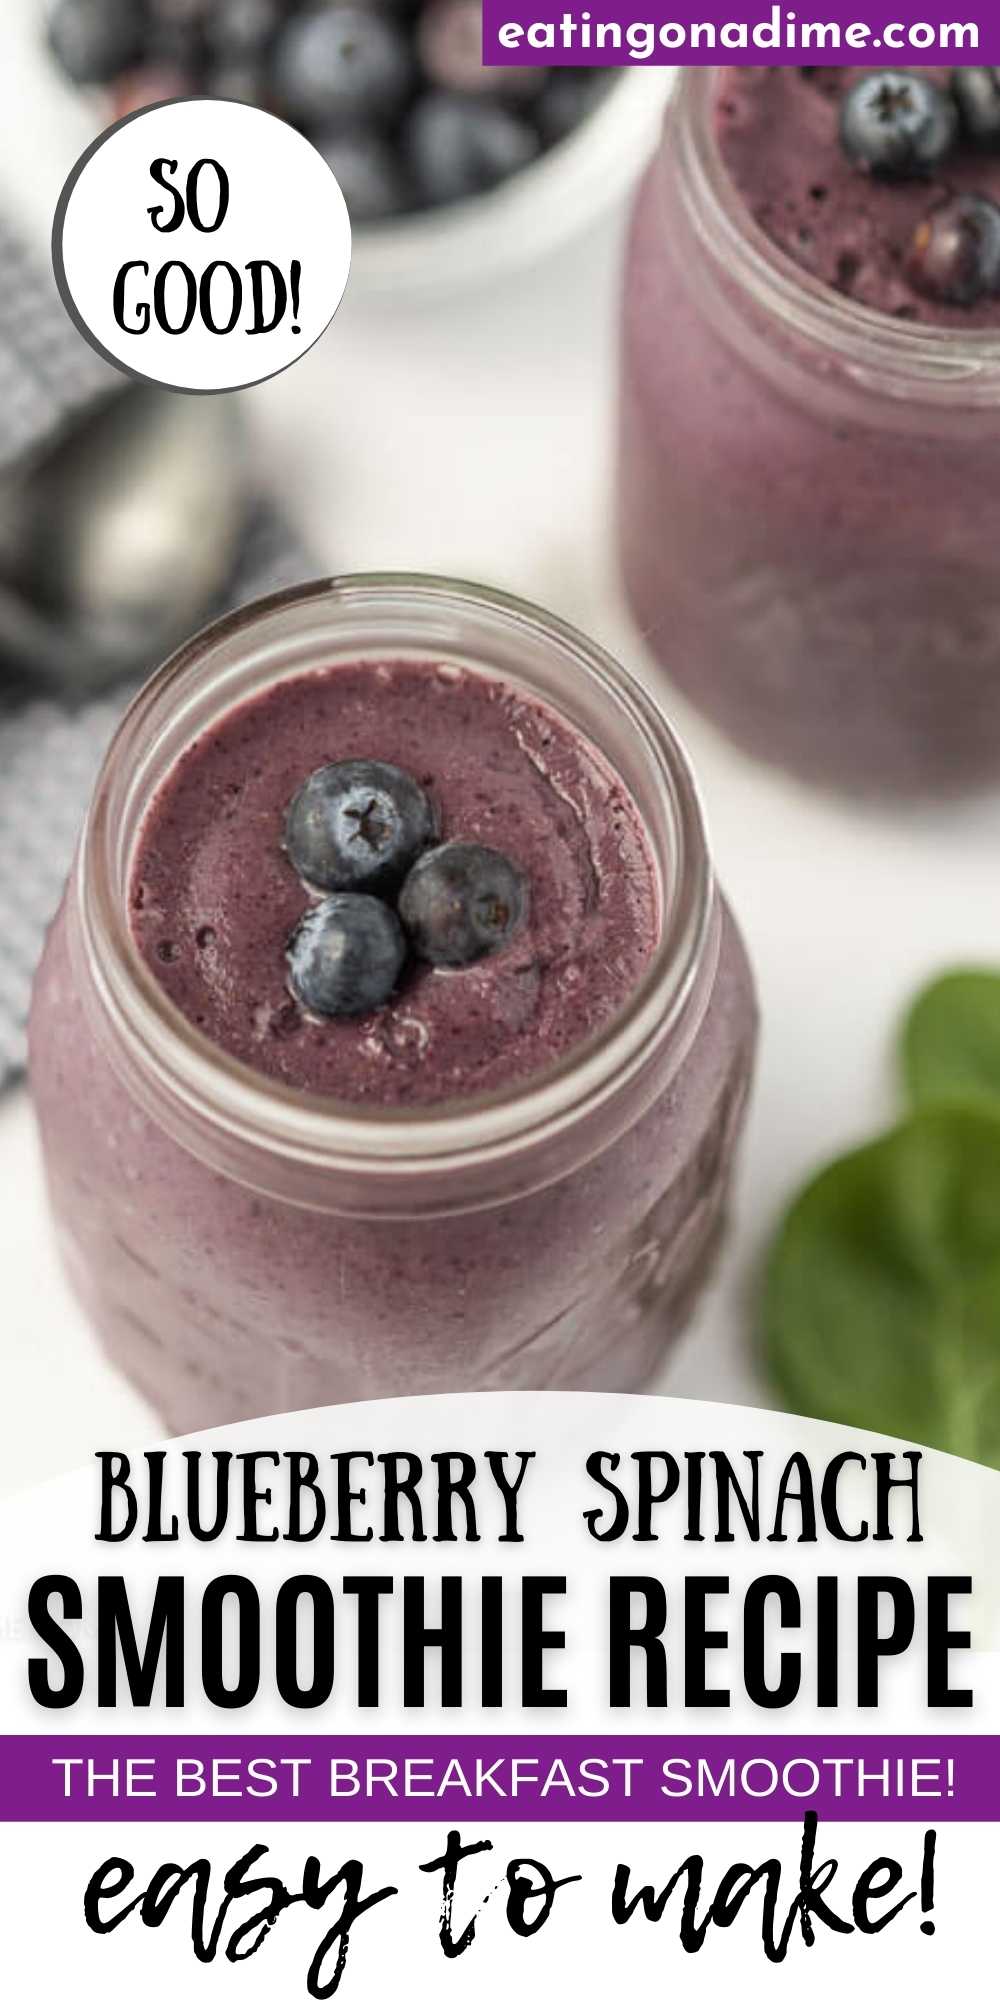 Blueberry spinach smoothie recipe - healthy blueberry smoothie recipe